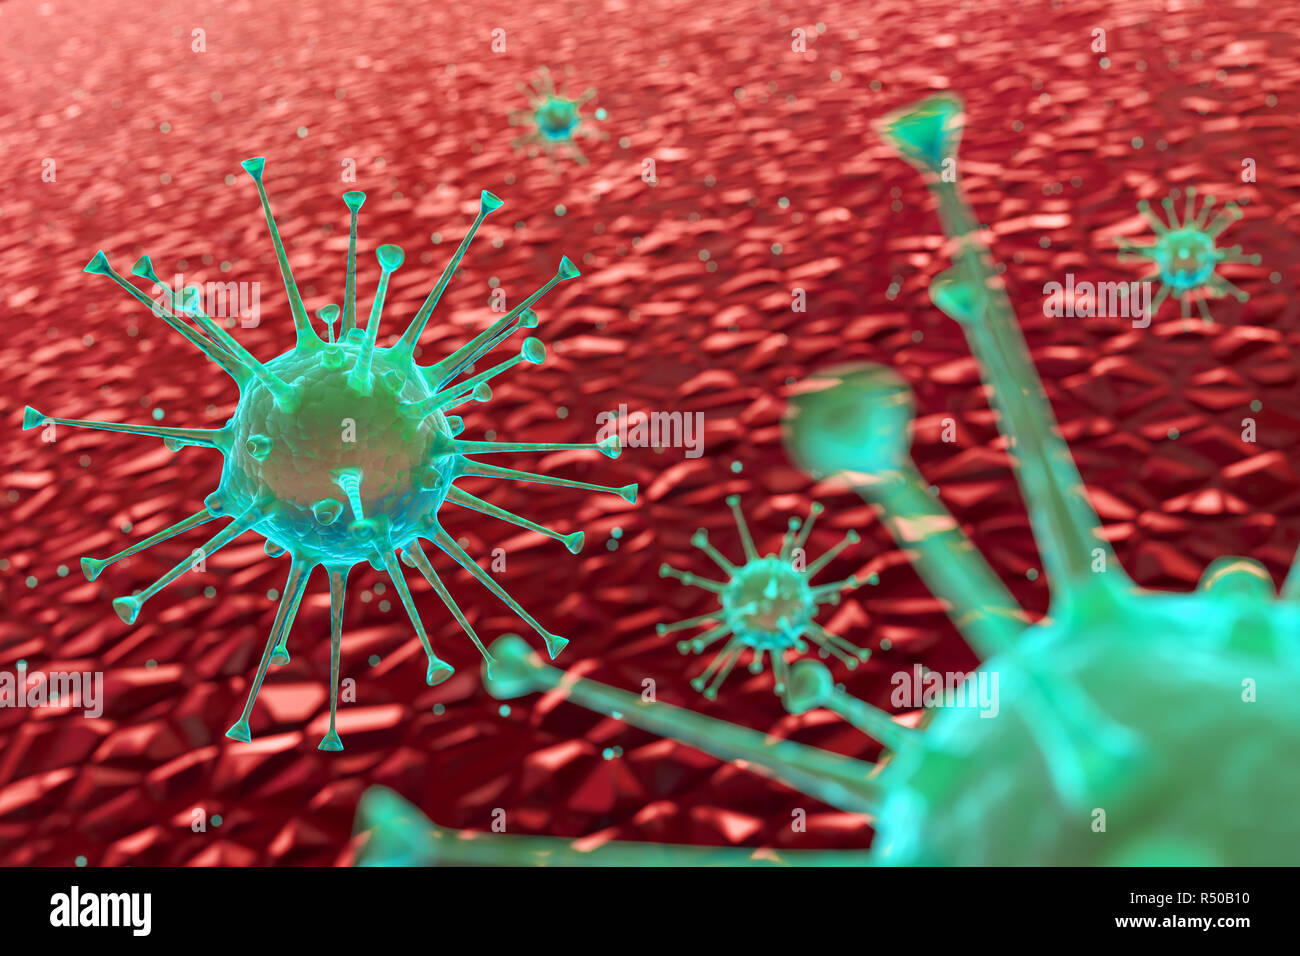 3D model of some Virus or Bacteria in its microscopic environment Stock Photo